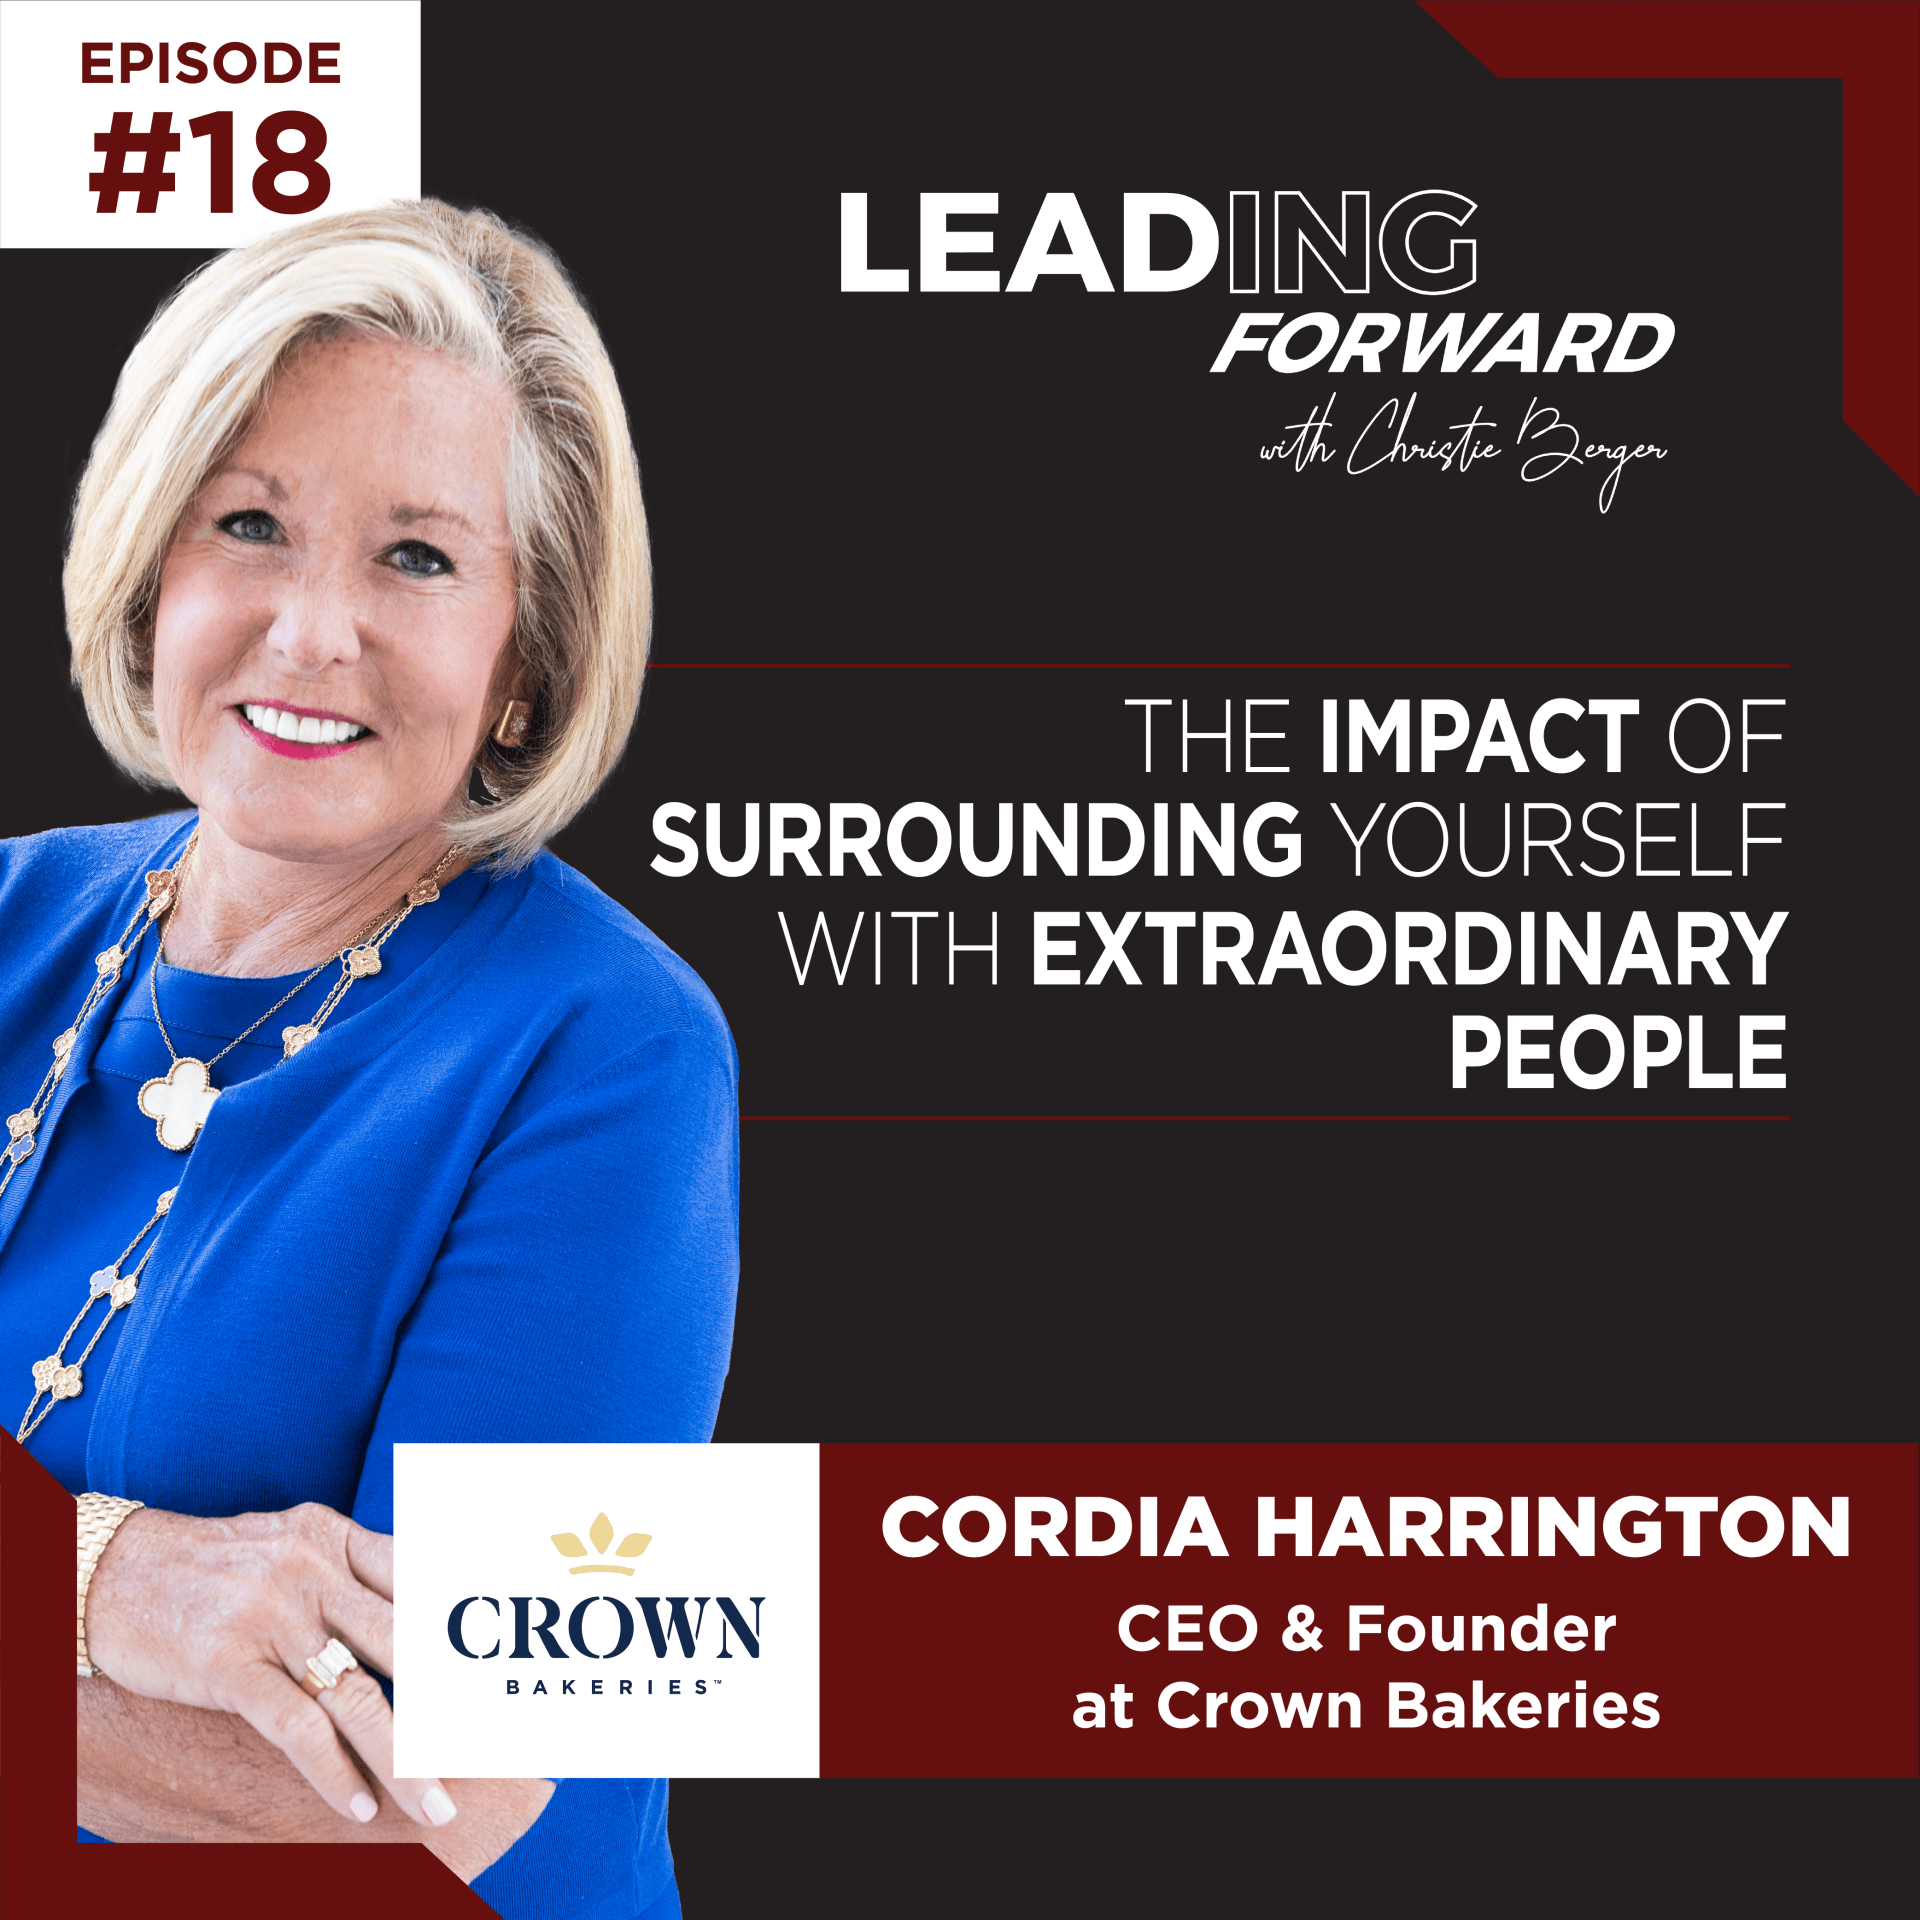 Leading Forward Podcast- Cordia Harrington discusses their experience running businesses and leading